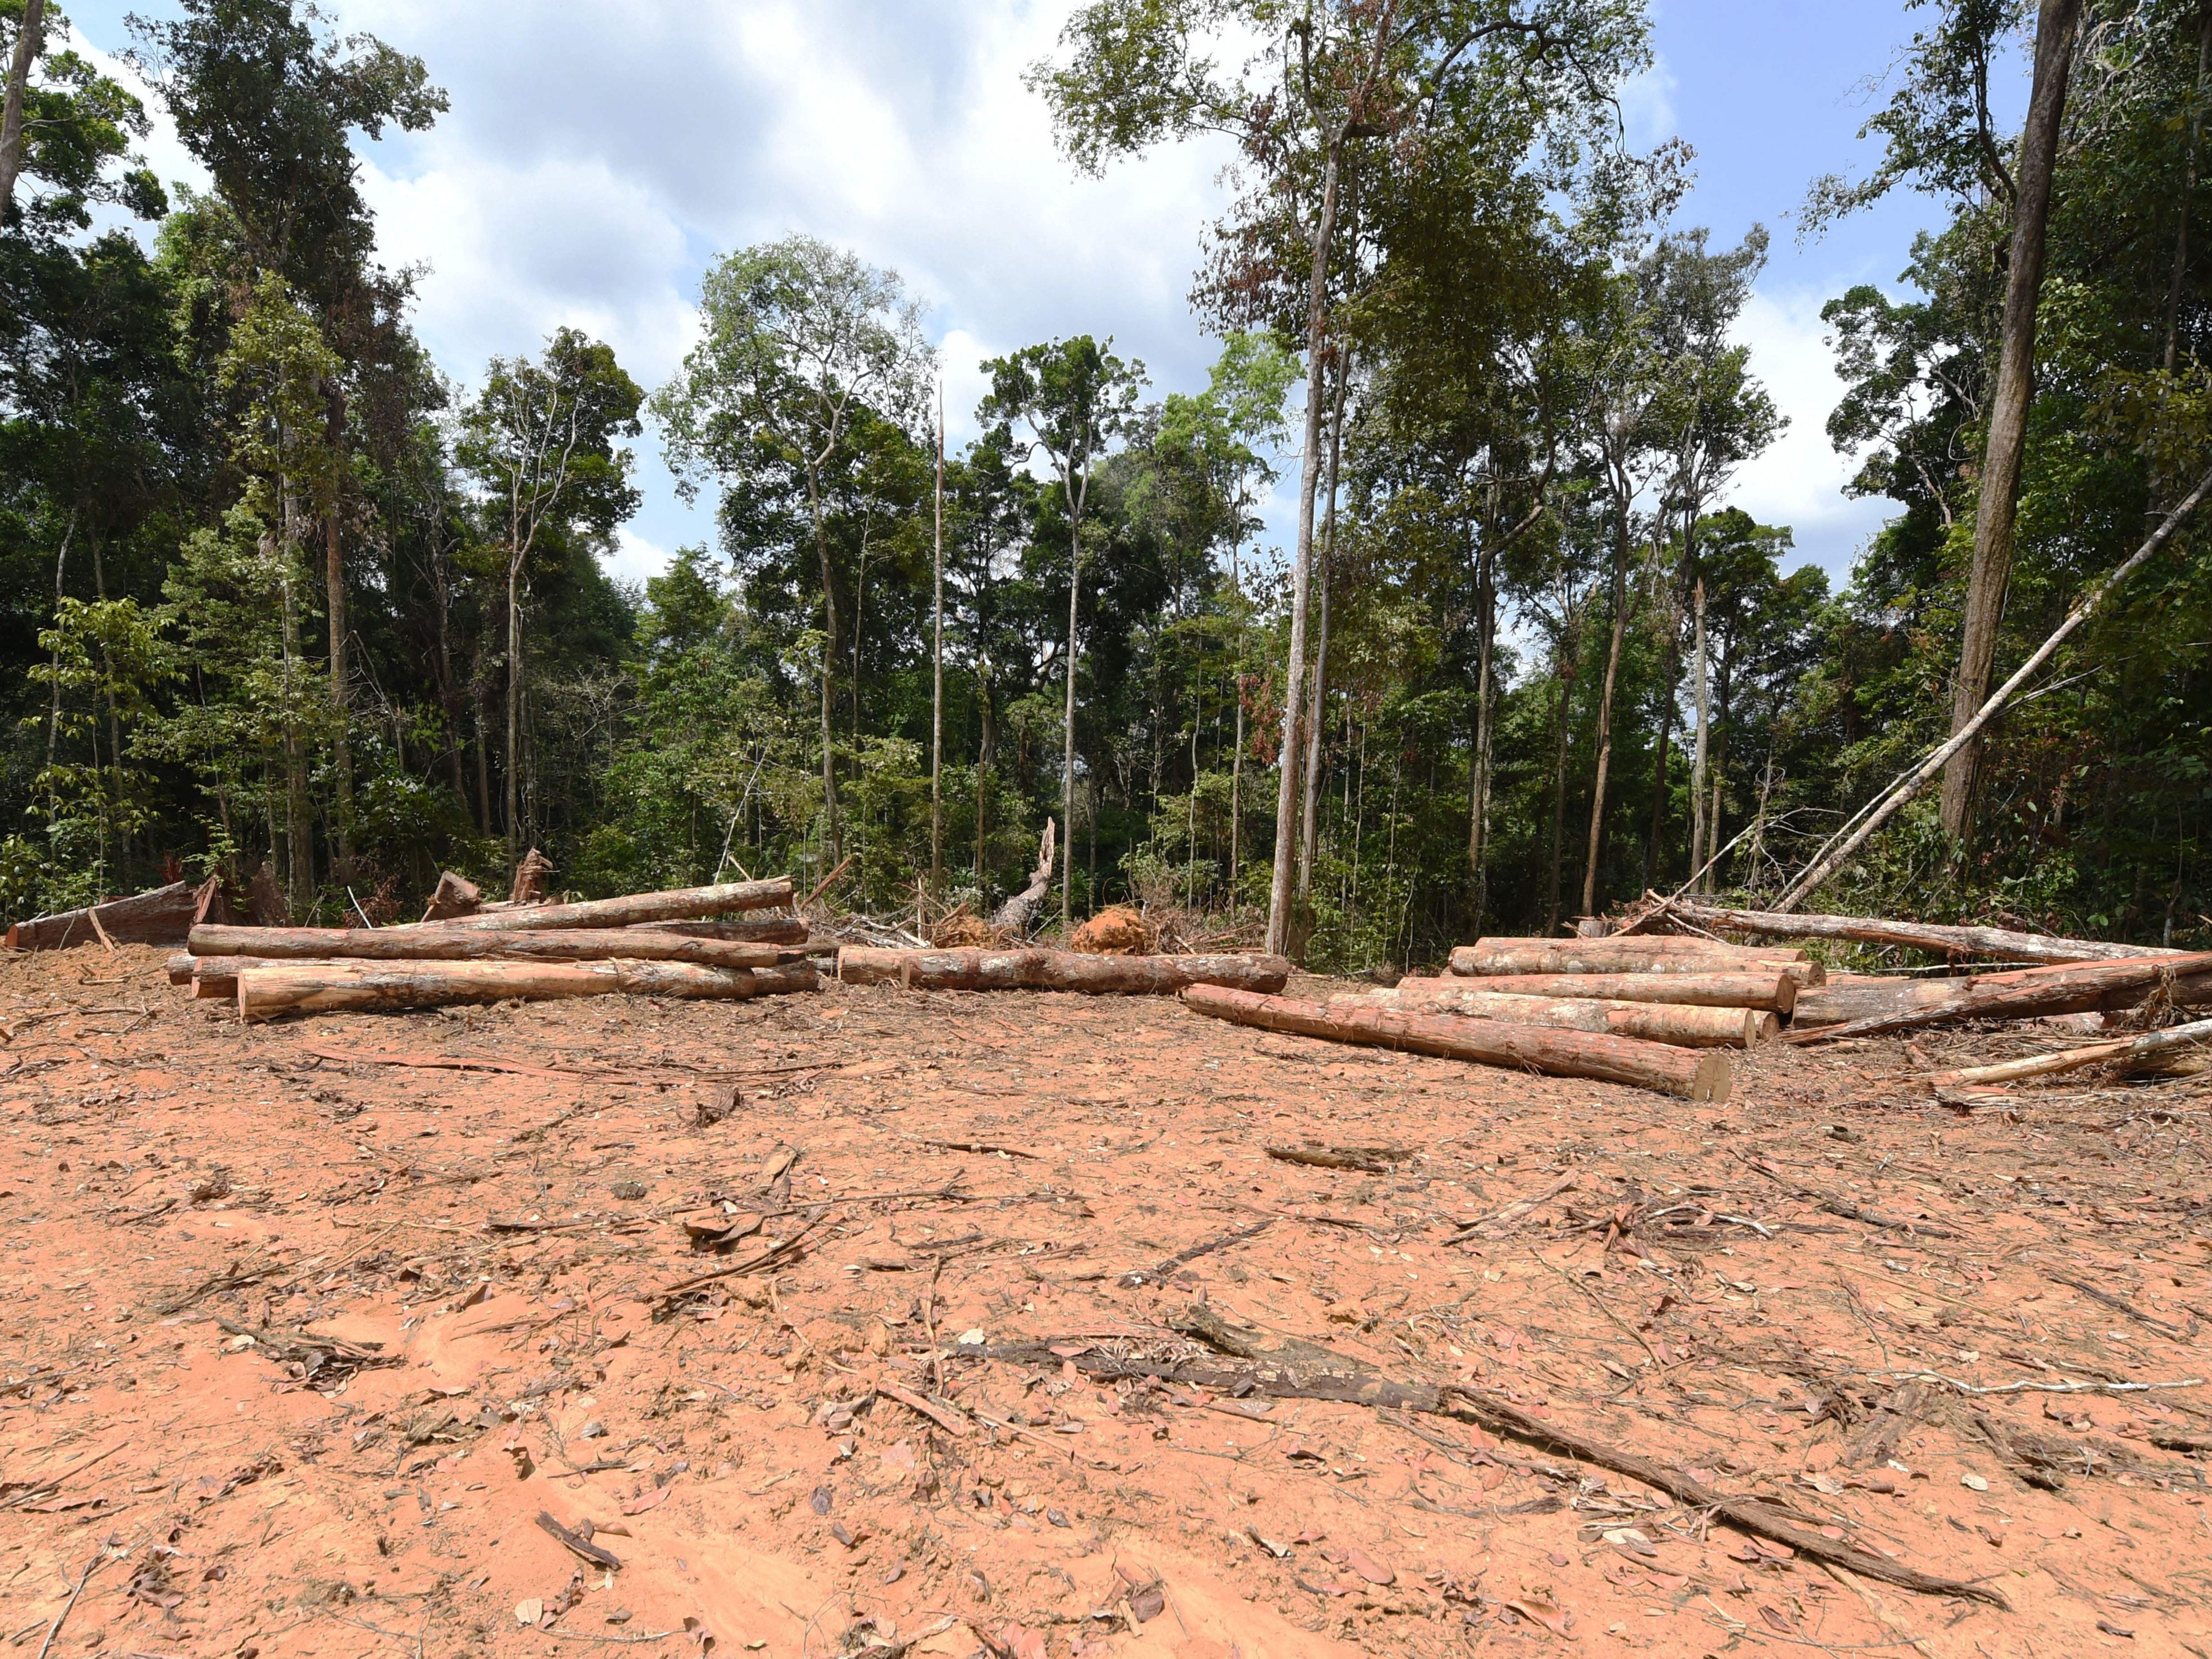 Three monthly records for deforestation in the Brazilian Amazon have been broken this year so far